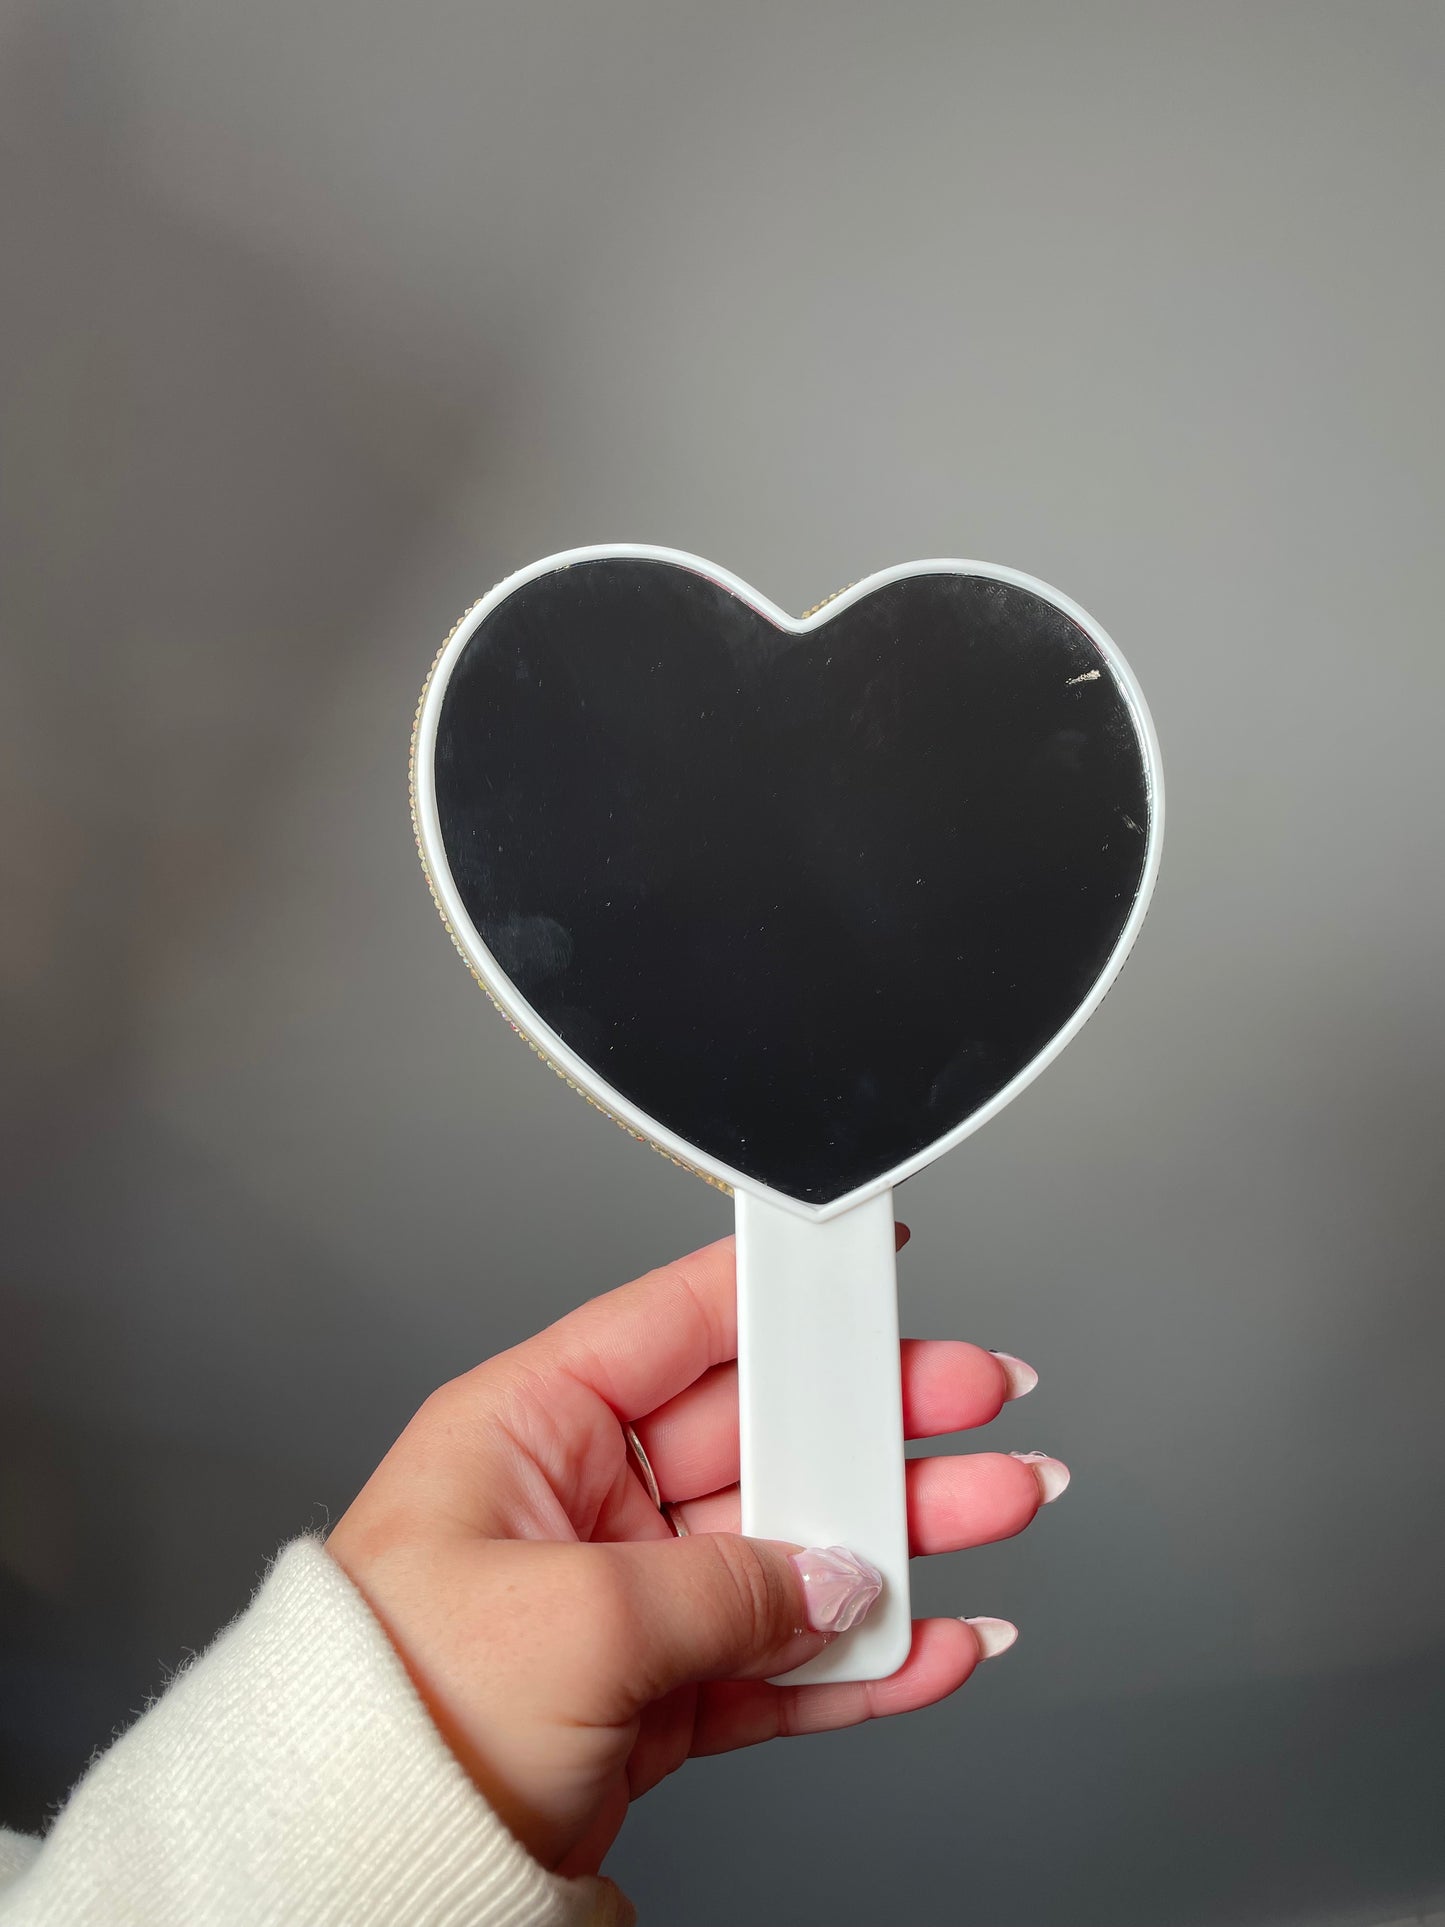 Bedazzled heart shaped mirror